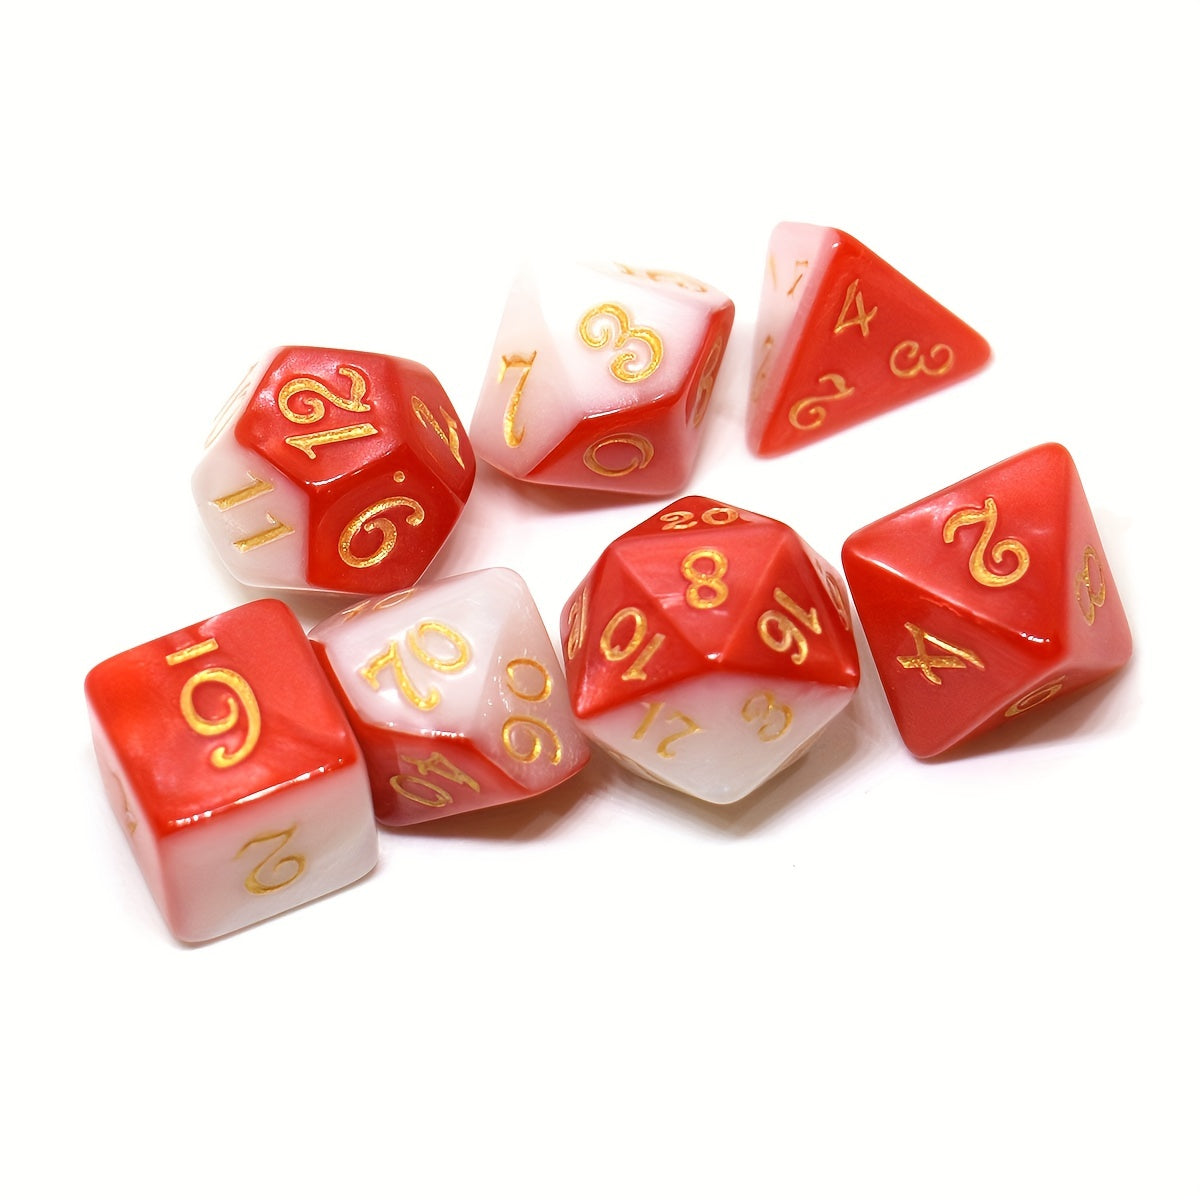 FREE Today: Red And Cream Layered Dice Set